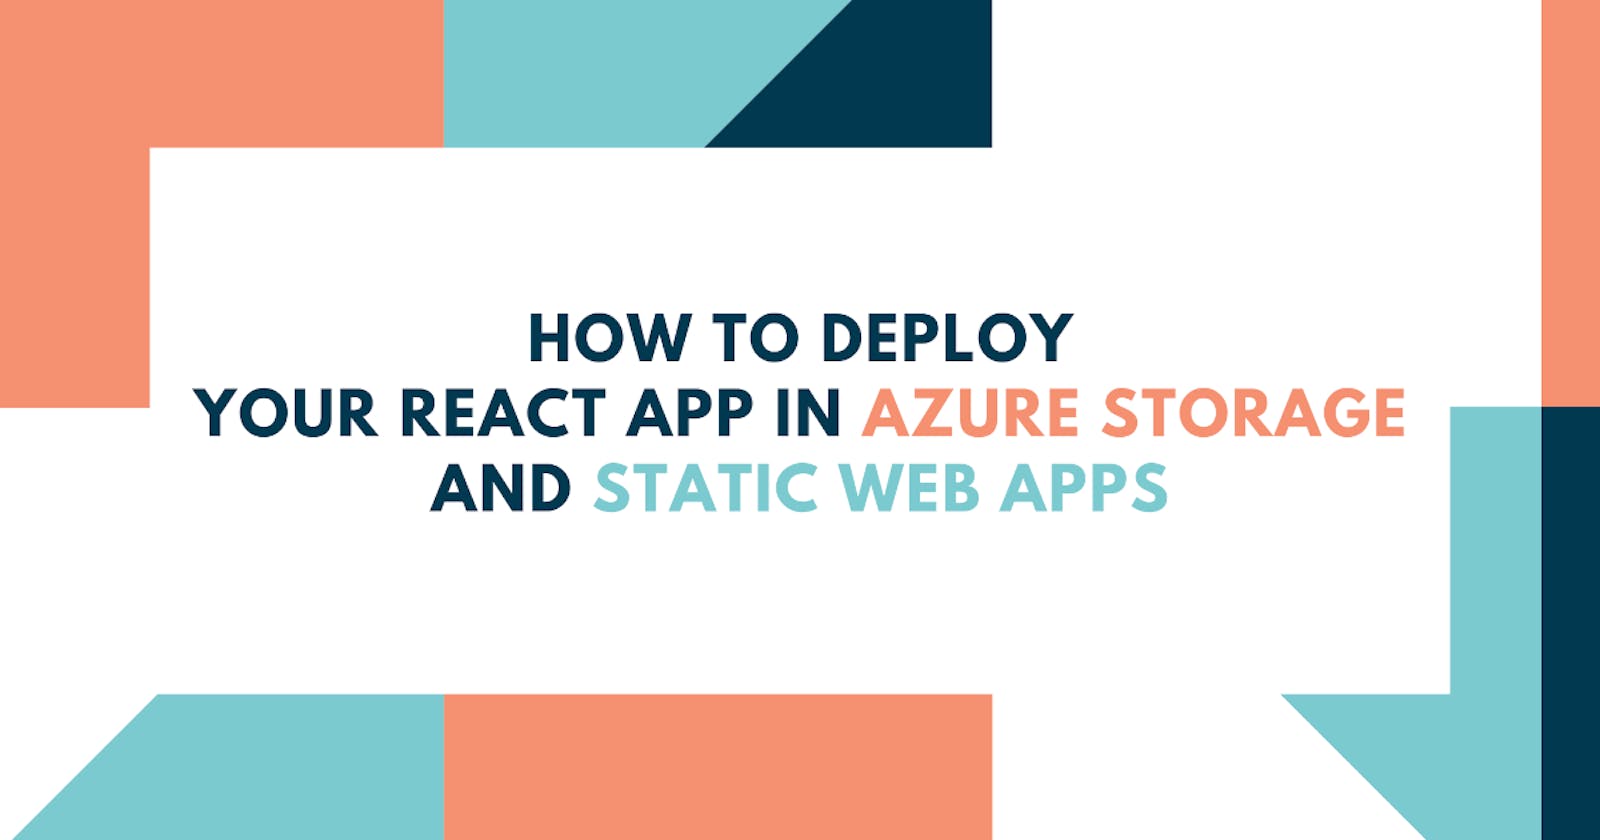 How to Deploy Your React App in Azure Storage and Static Web Apps